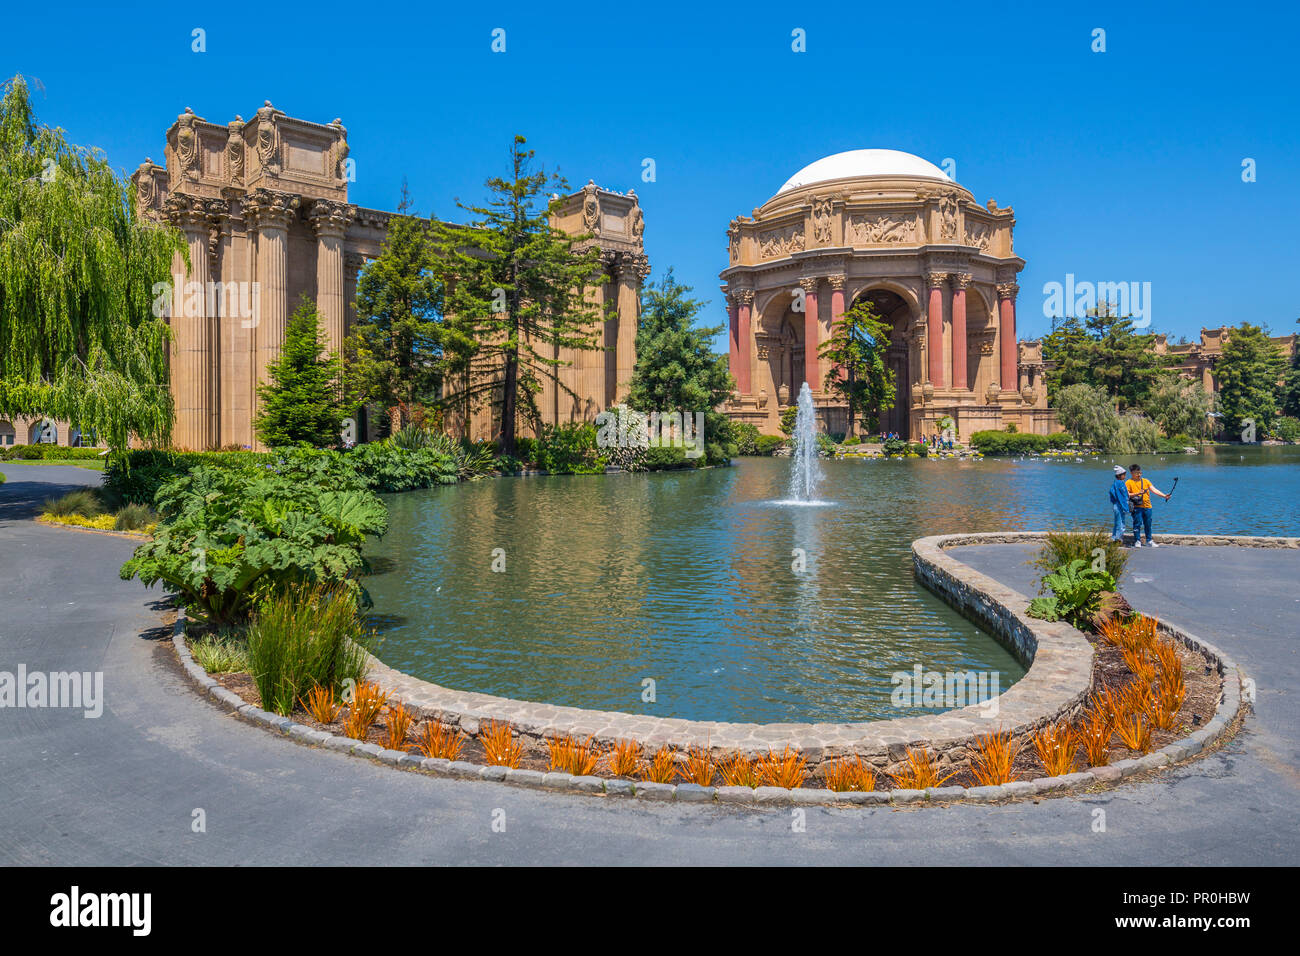 View of Palace of Fine Arts Theatre, San Francisco, California, United States of America, North America Stock Photo